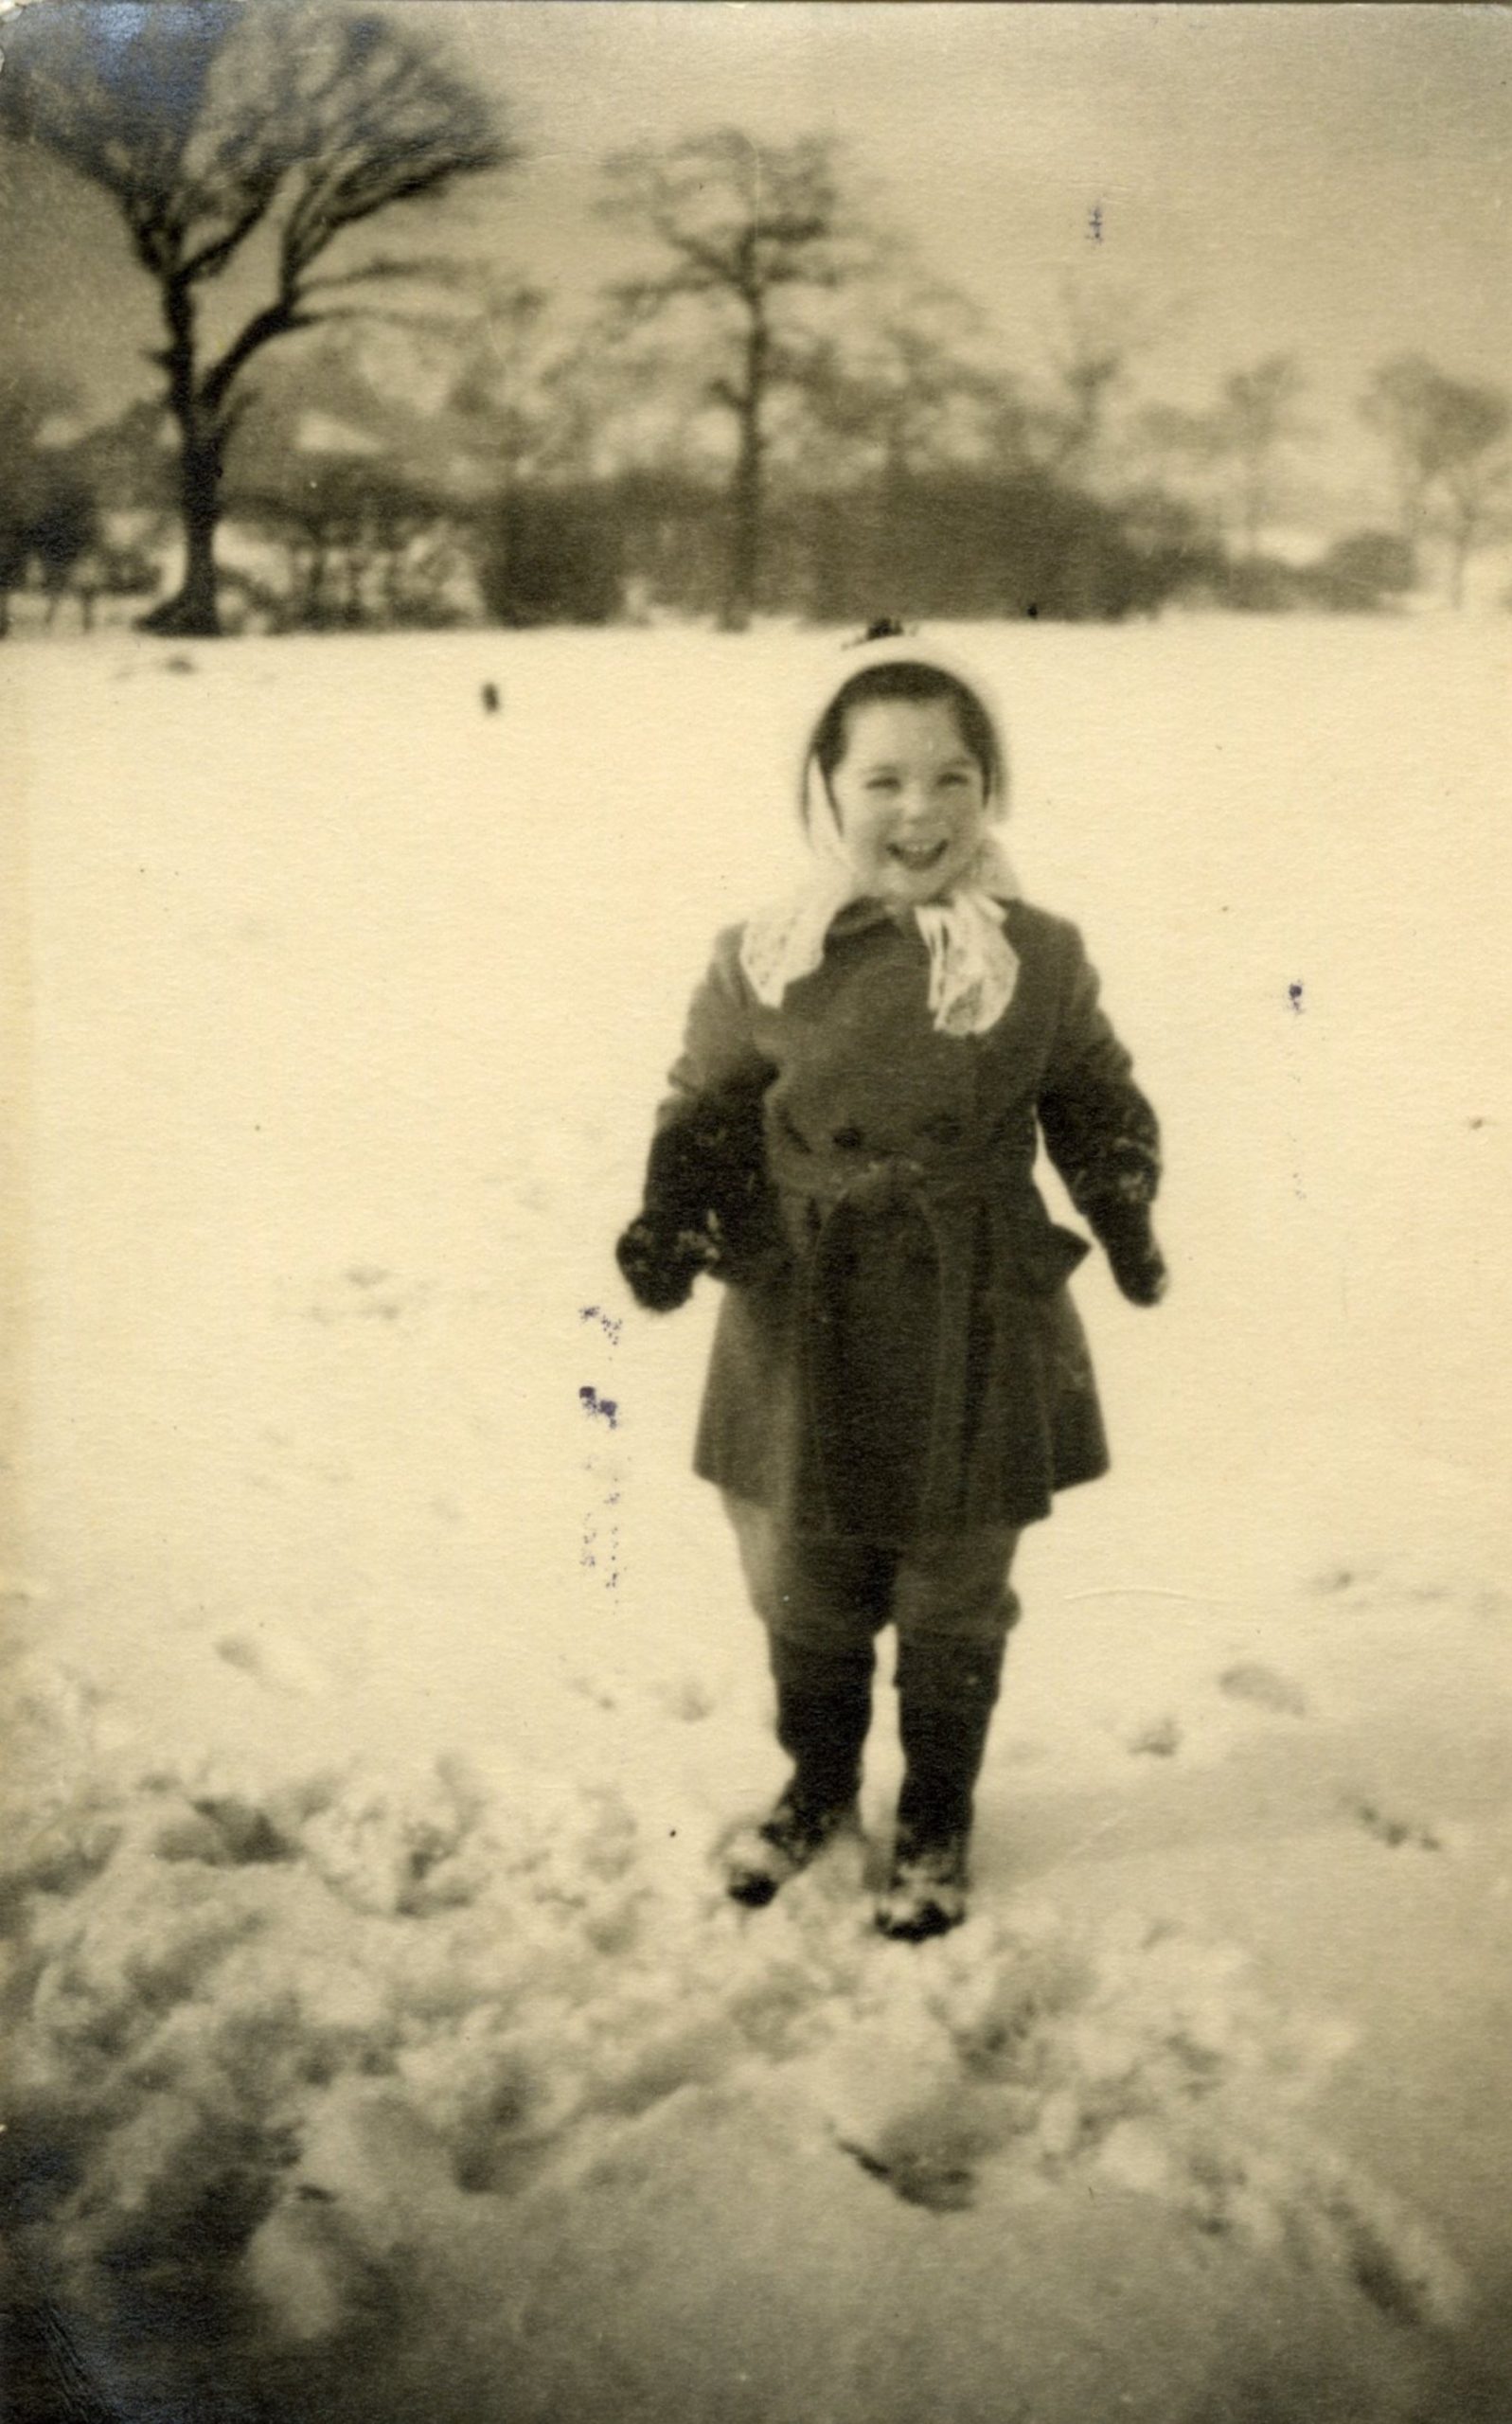 Me smiling in the snow that covered the field at the bottom of Wells Road, 1947